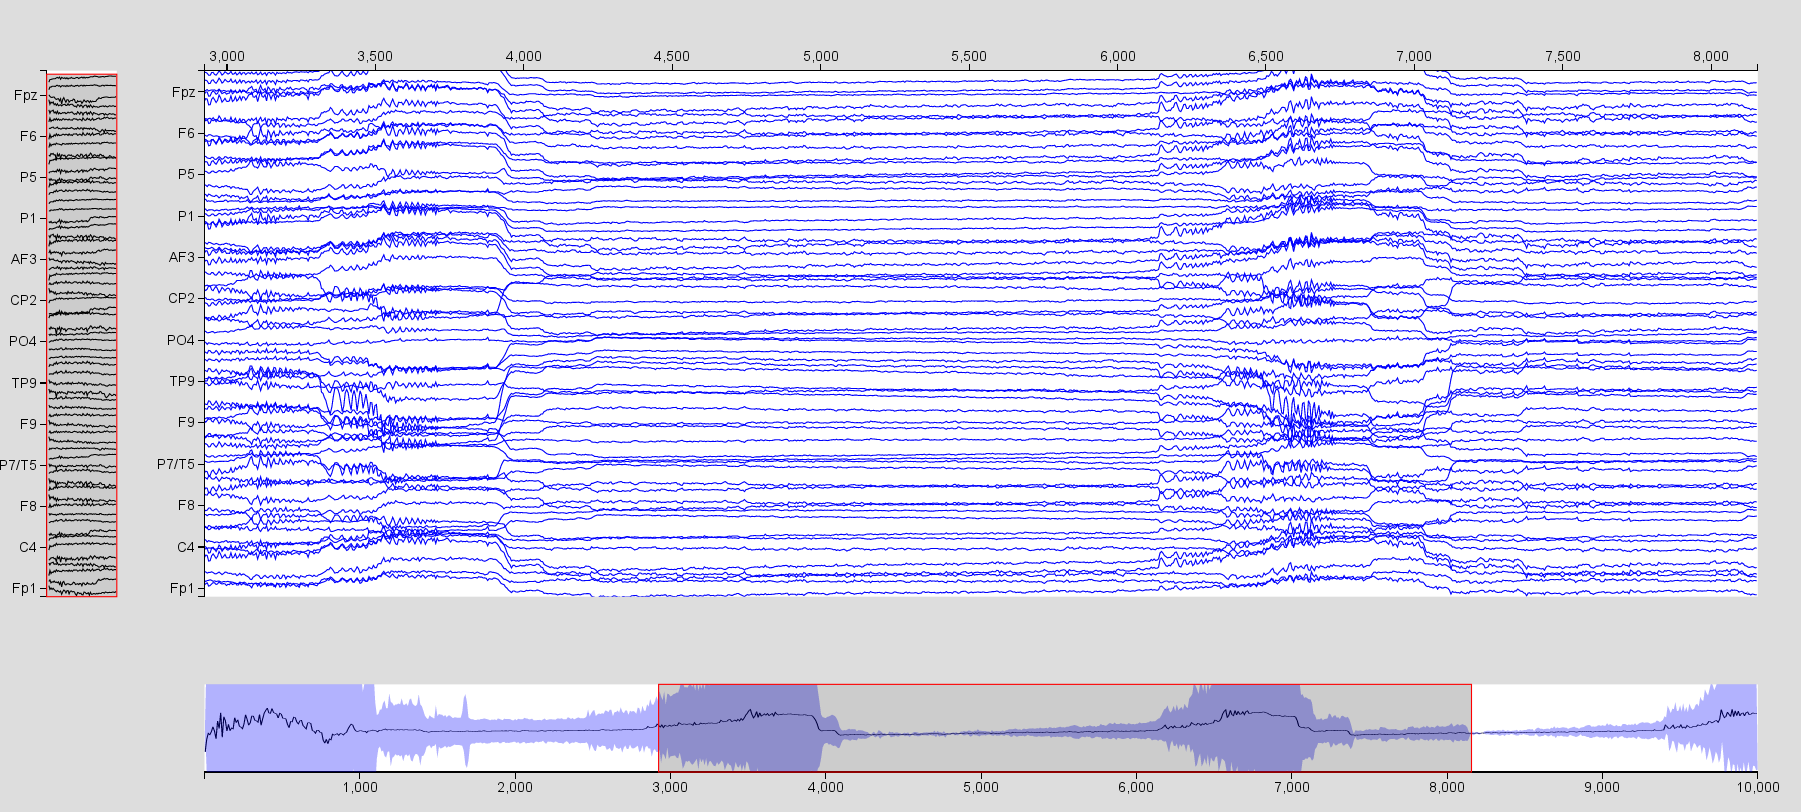 EEG time series of the simulation